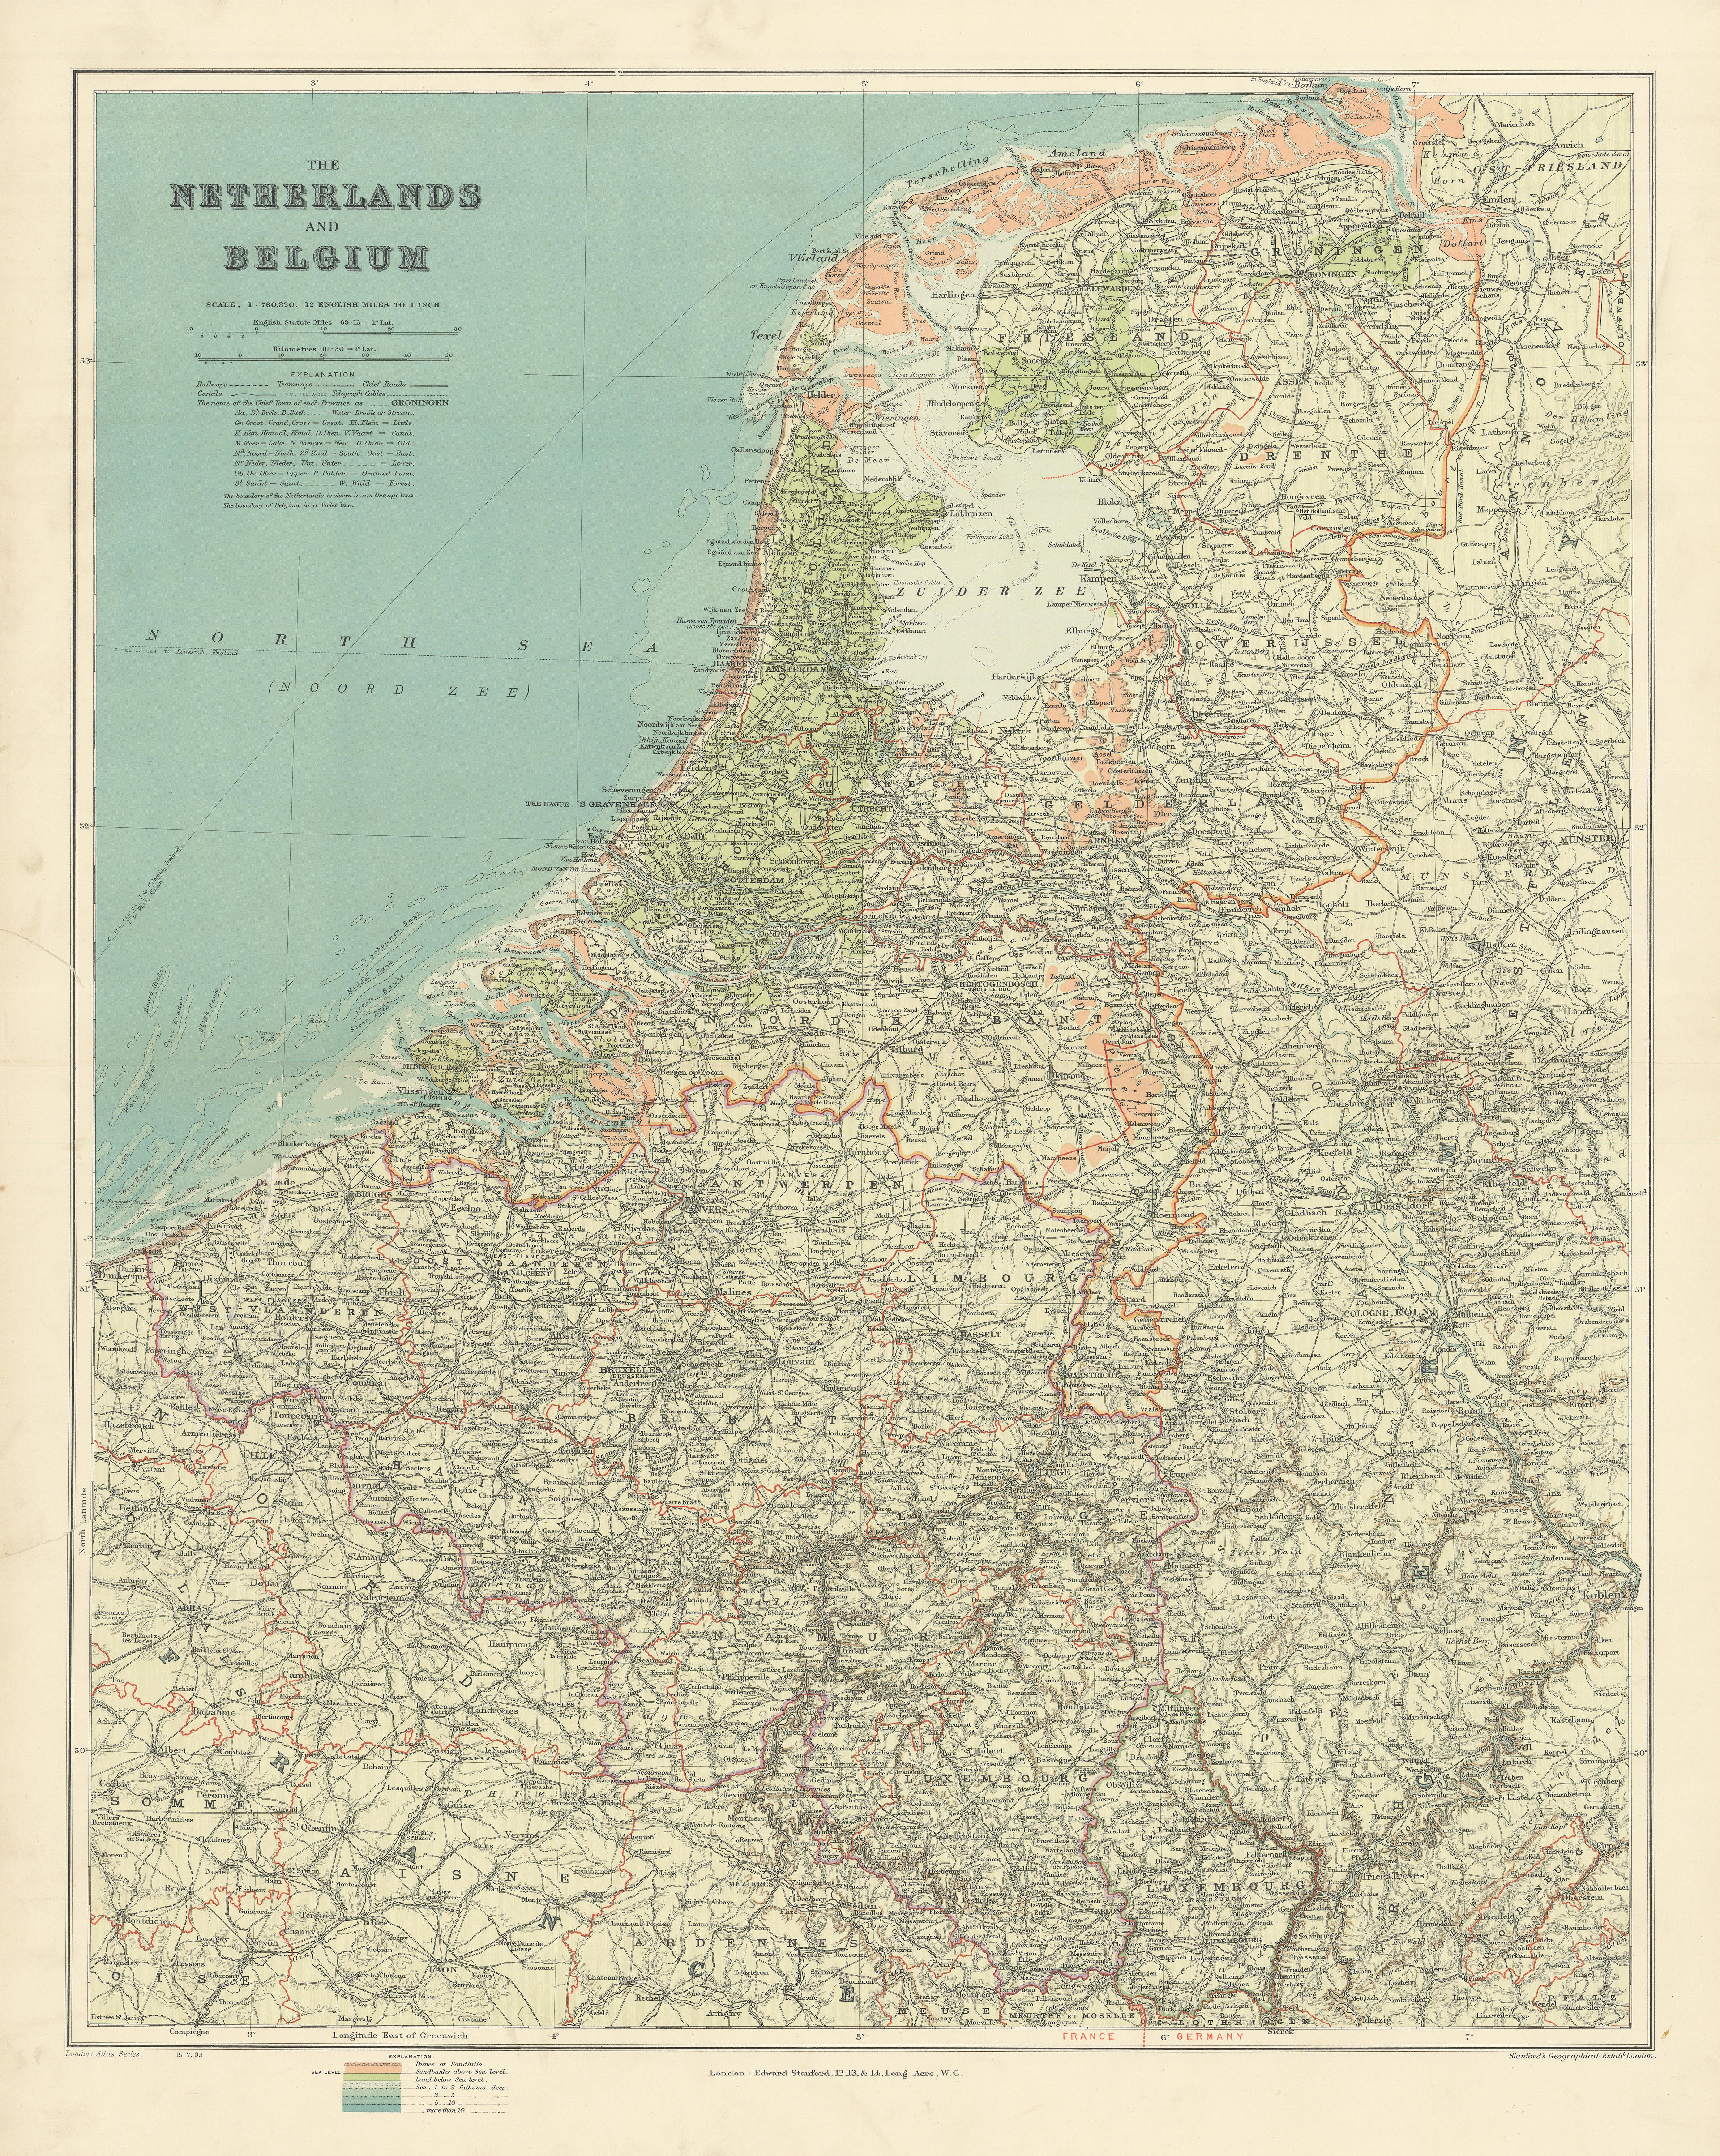 Associate Product Netherlands & Belgium. Benelux. Projected Great Dyke. 68x54cm. STANFORD 1904 map